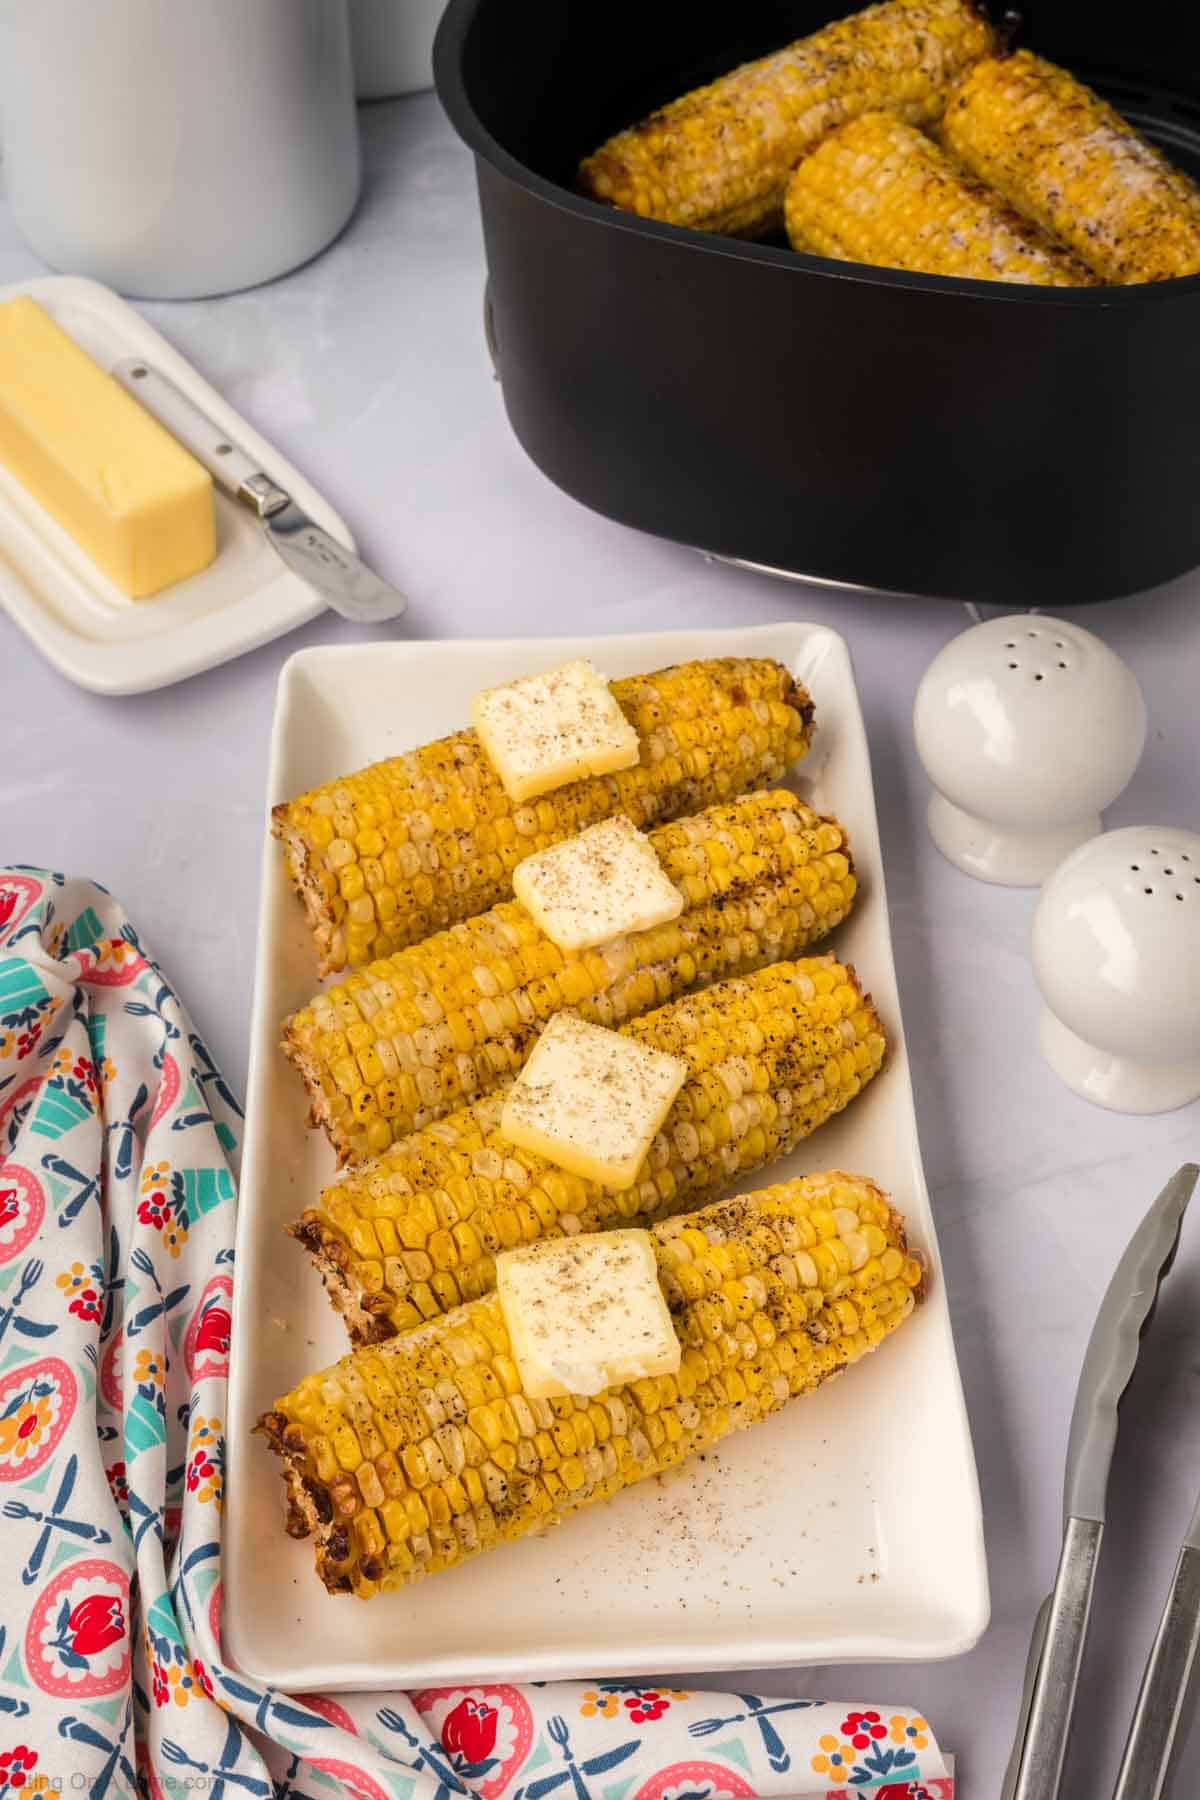 Air Fryer Corn on the Cob, charred to perfection and topped with butter and pepper, is arranged on a white rectangular plate. A pair of tongs, a floral-patterned napkin, salt and pepper shakers, and a butter dish are beside the plate. A pot with more corn is visible in the background.